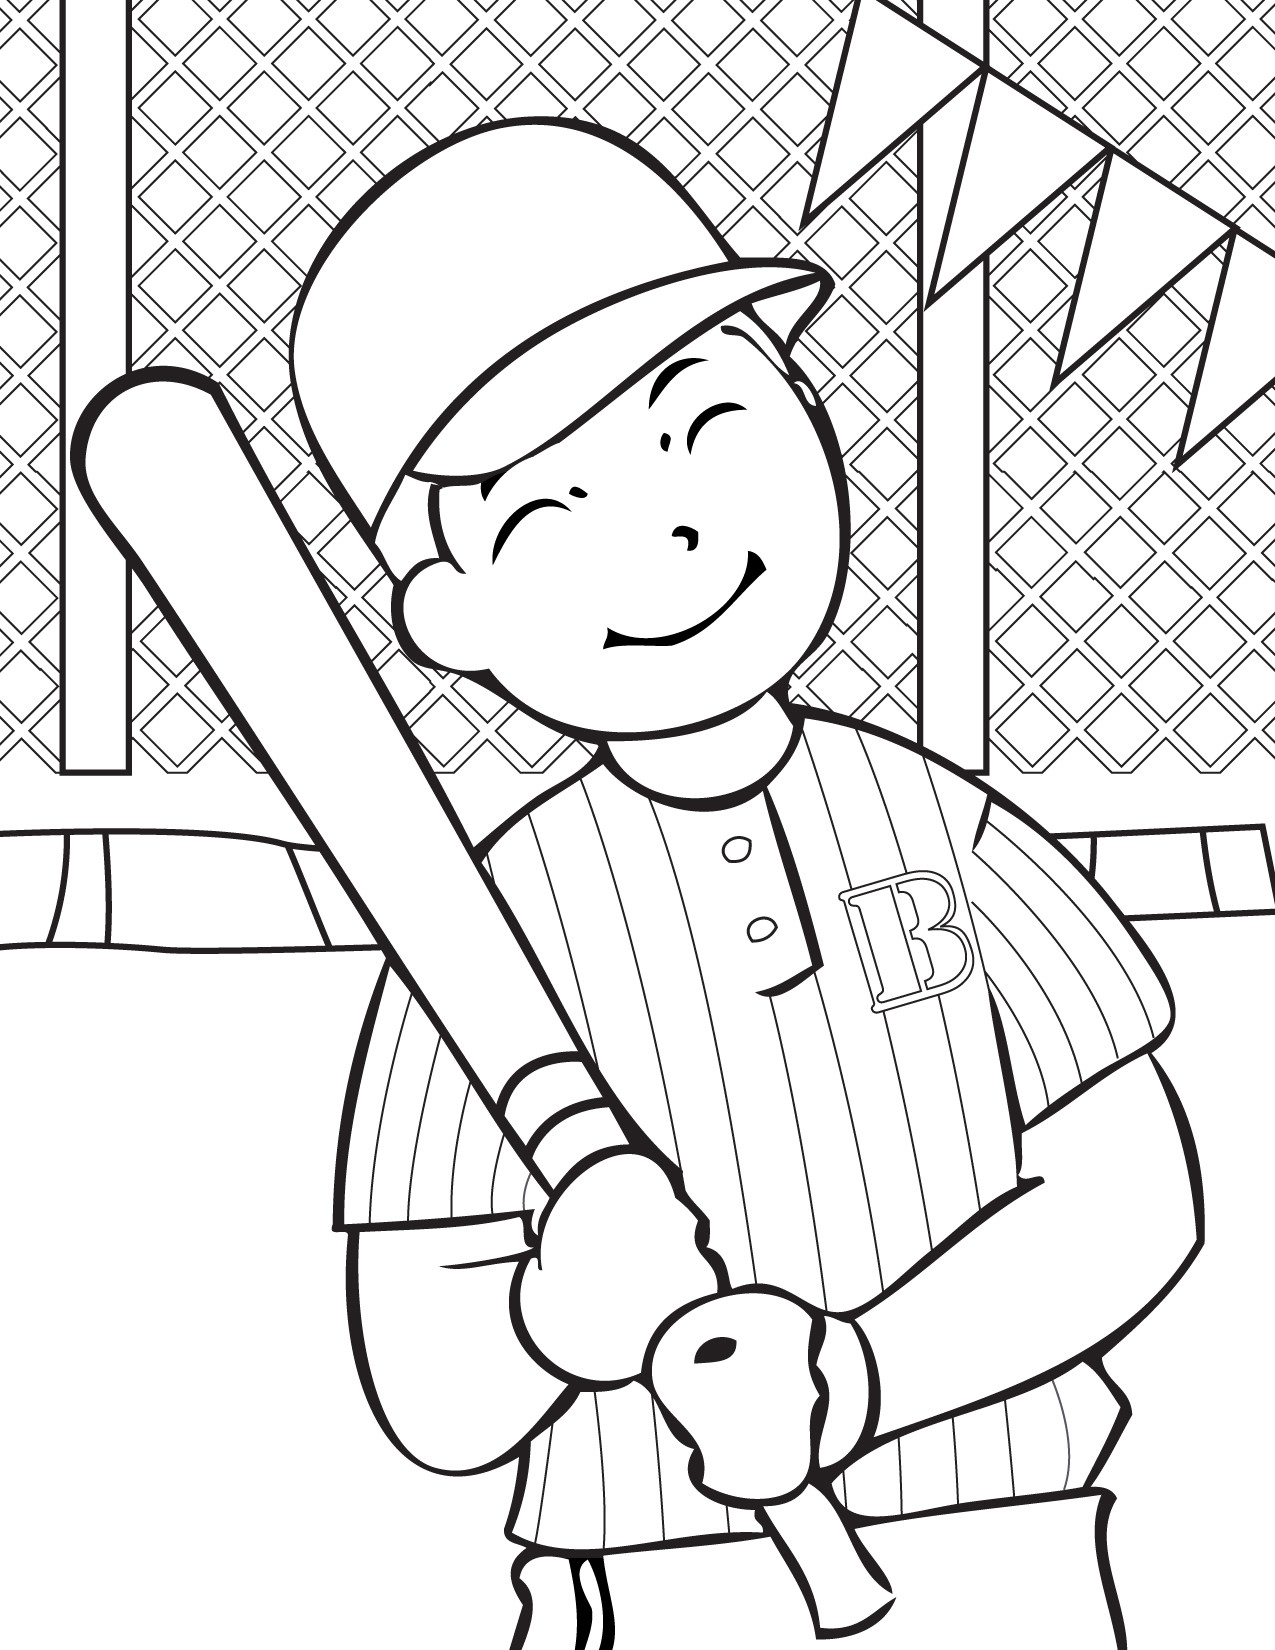 Printable Coloring Sheets For Boys
 Free Printable Baseball Coloring Pages for Kids Best